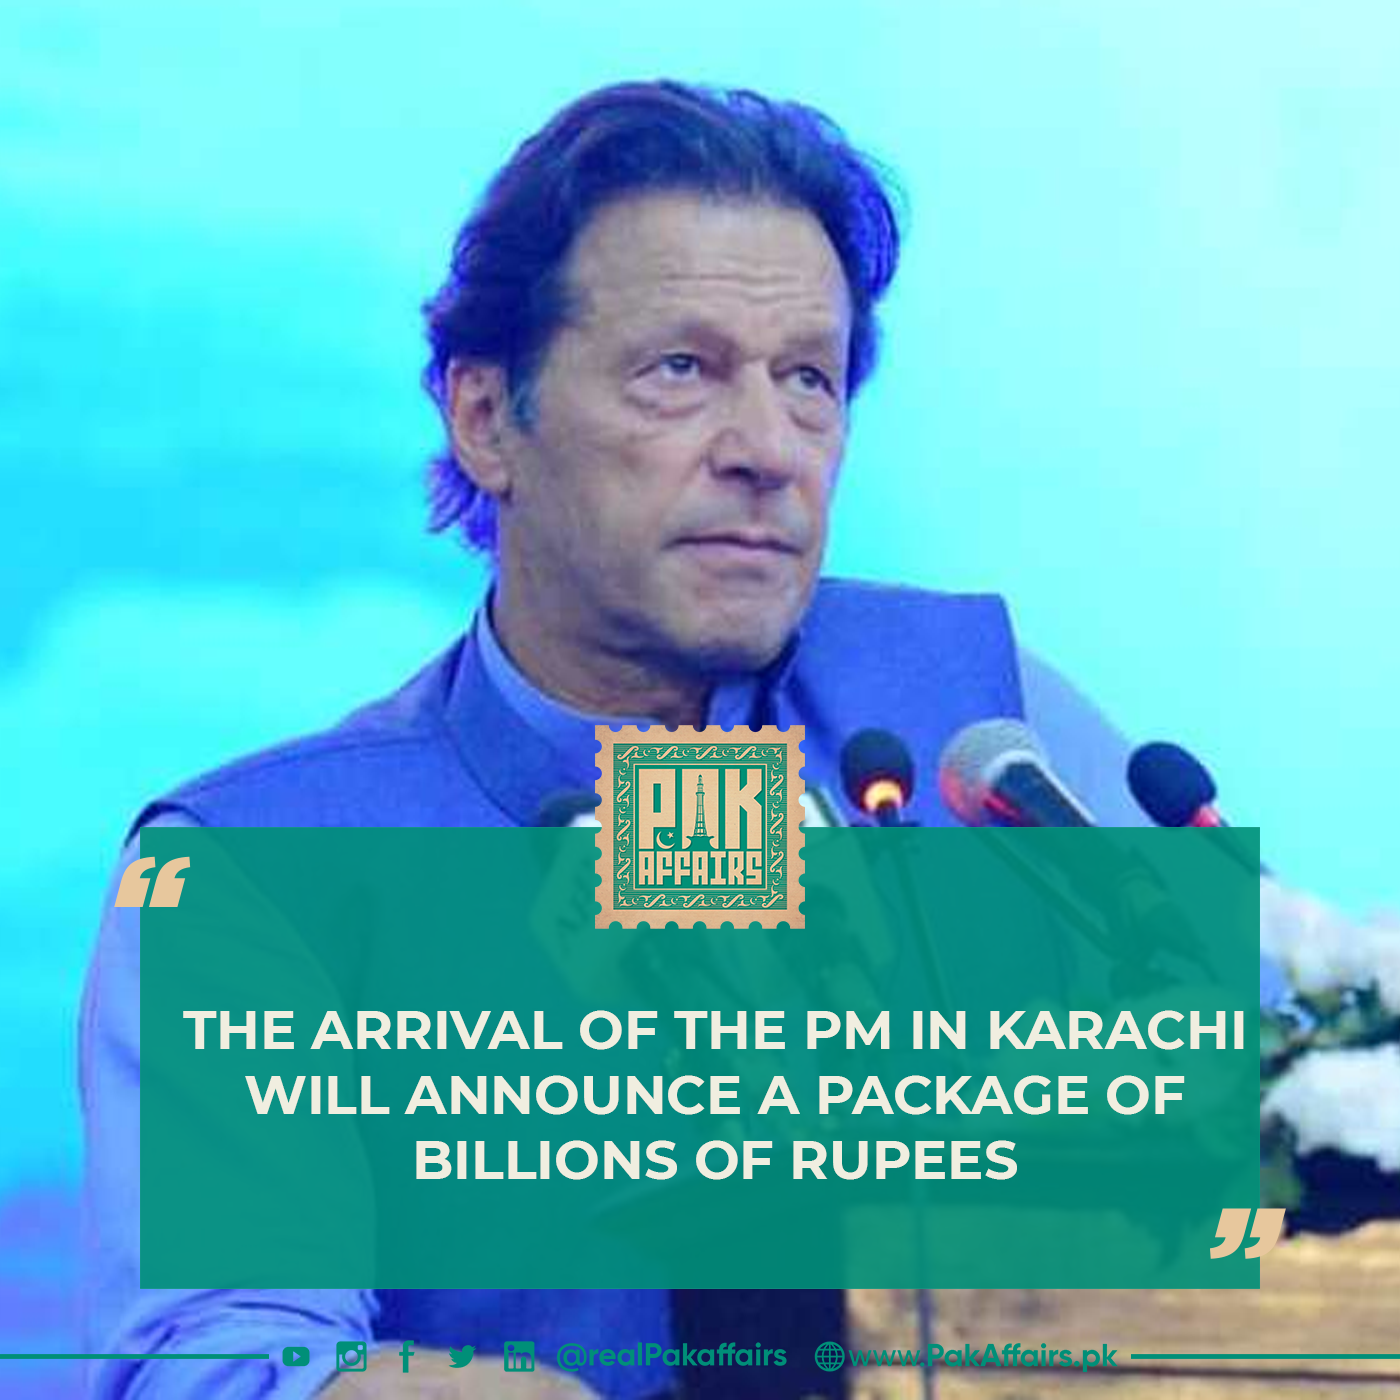 The arrival of the PM IN Karachi will announce a package of billions of rupees